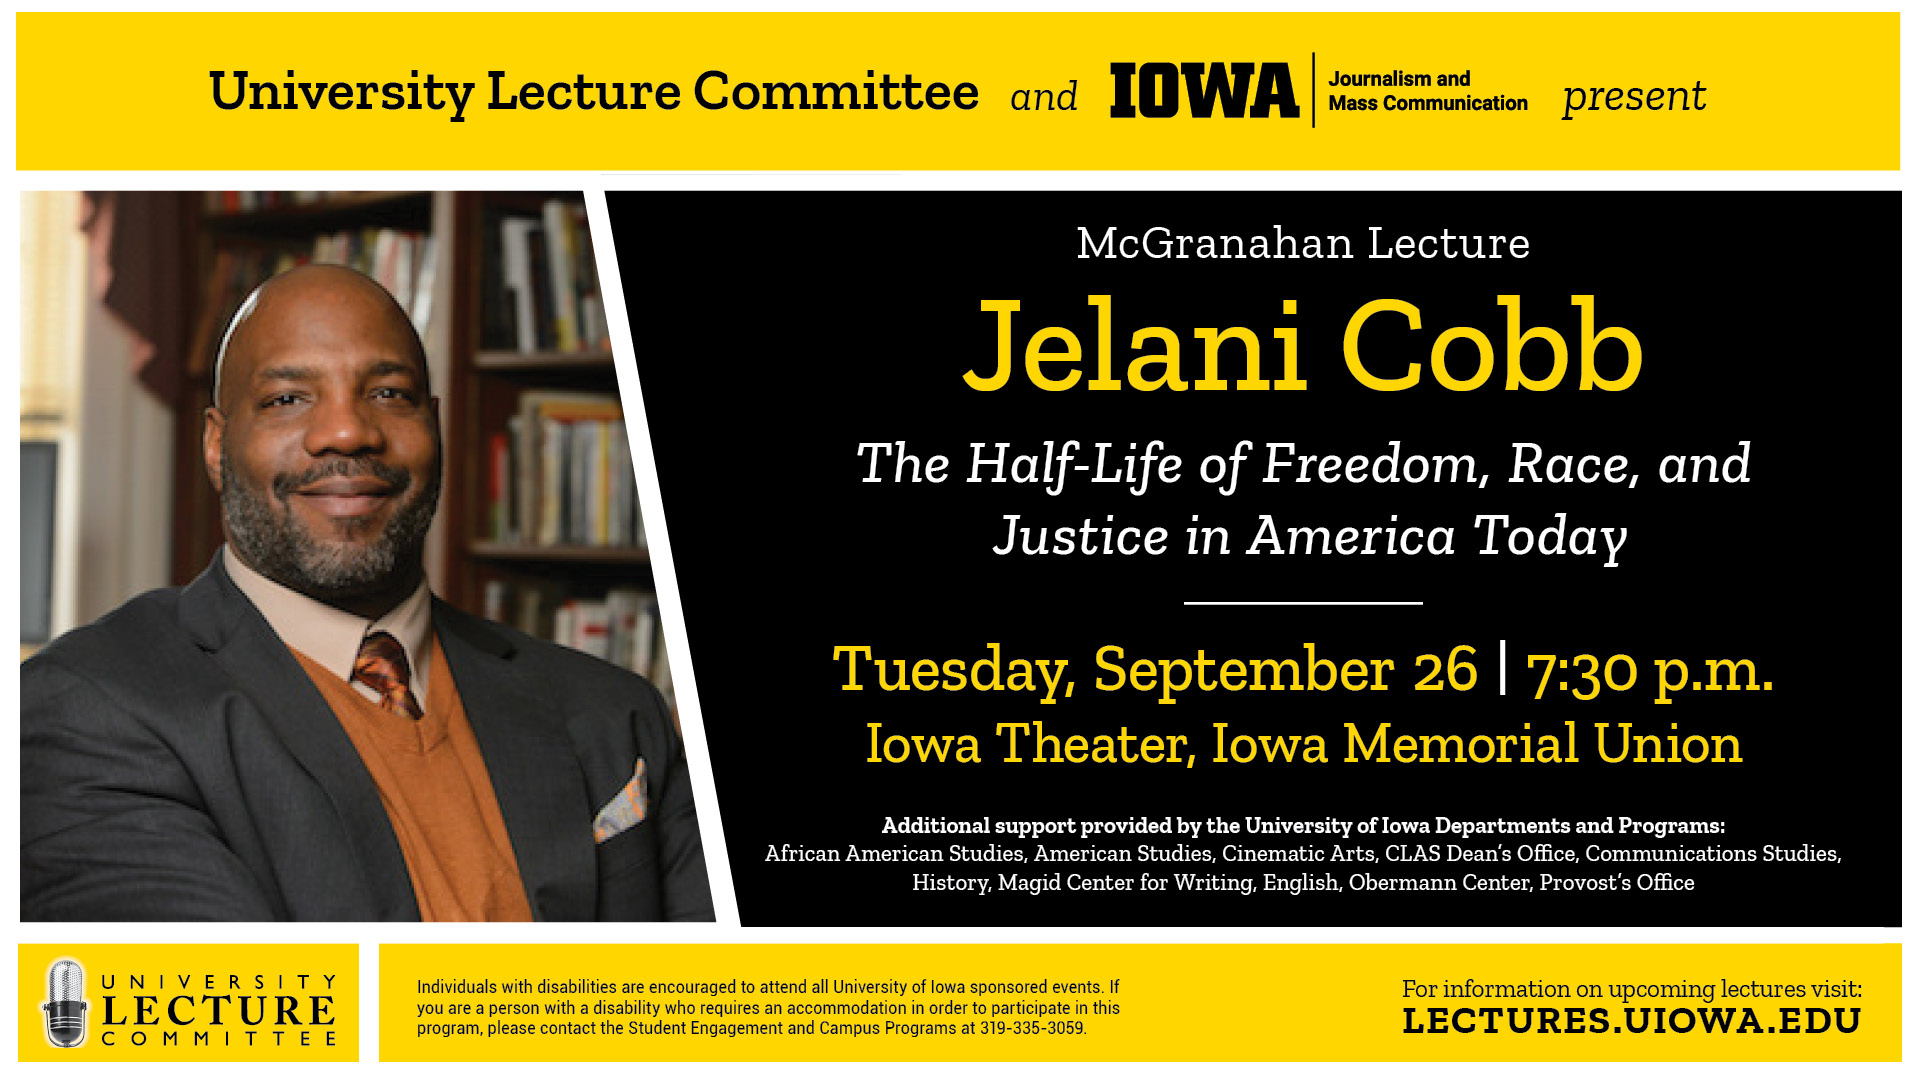 University Lecture Committee and Iowa Journalism and Mass Communication present: McGranahan Lecture: Jelani Cobb; The Half-Life of Freedom, Race, and Justice in America Today. Tuesday, September 26; 7:30p.m. Iowa Theater, Iowa Memorial Union